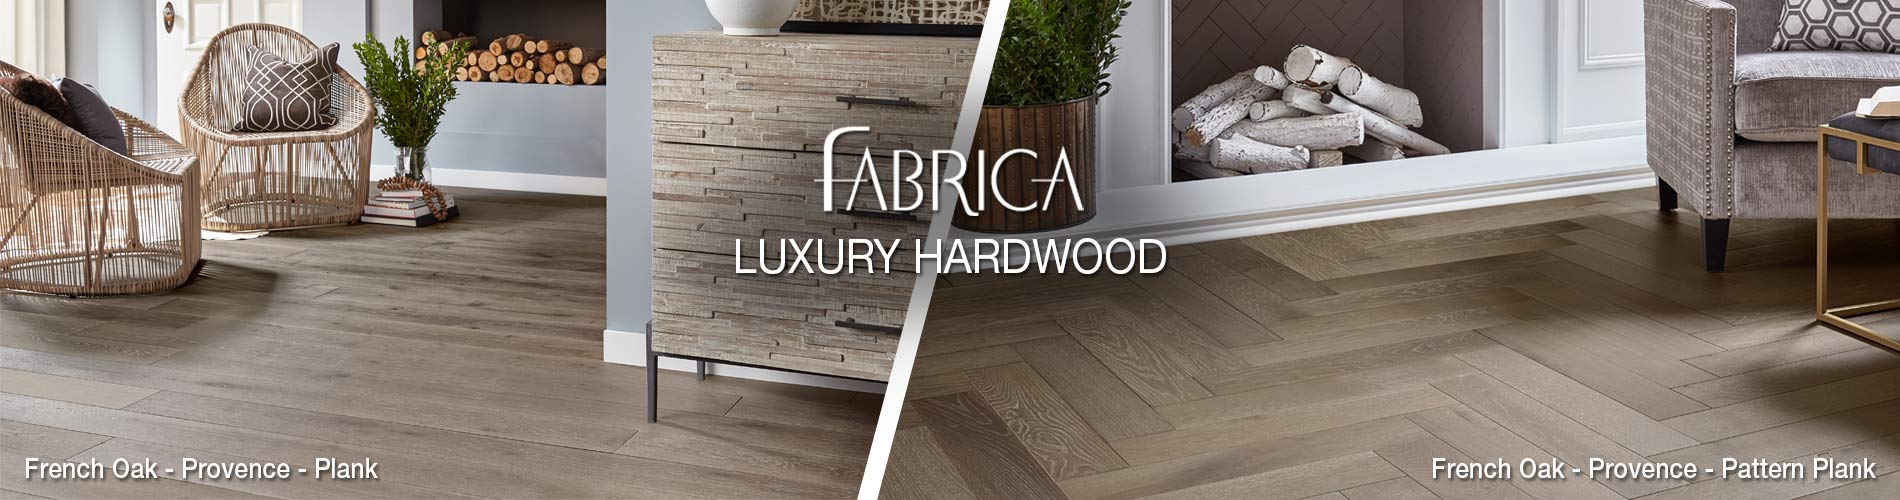 Stop by our showroom today and check out some of our beautiful Fabrica French Oak Provence plank and pattern plank hardwood flooring!